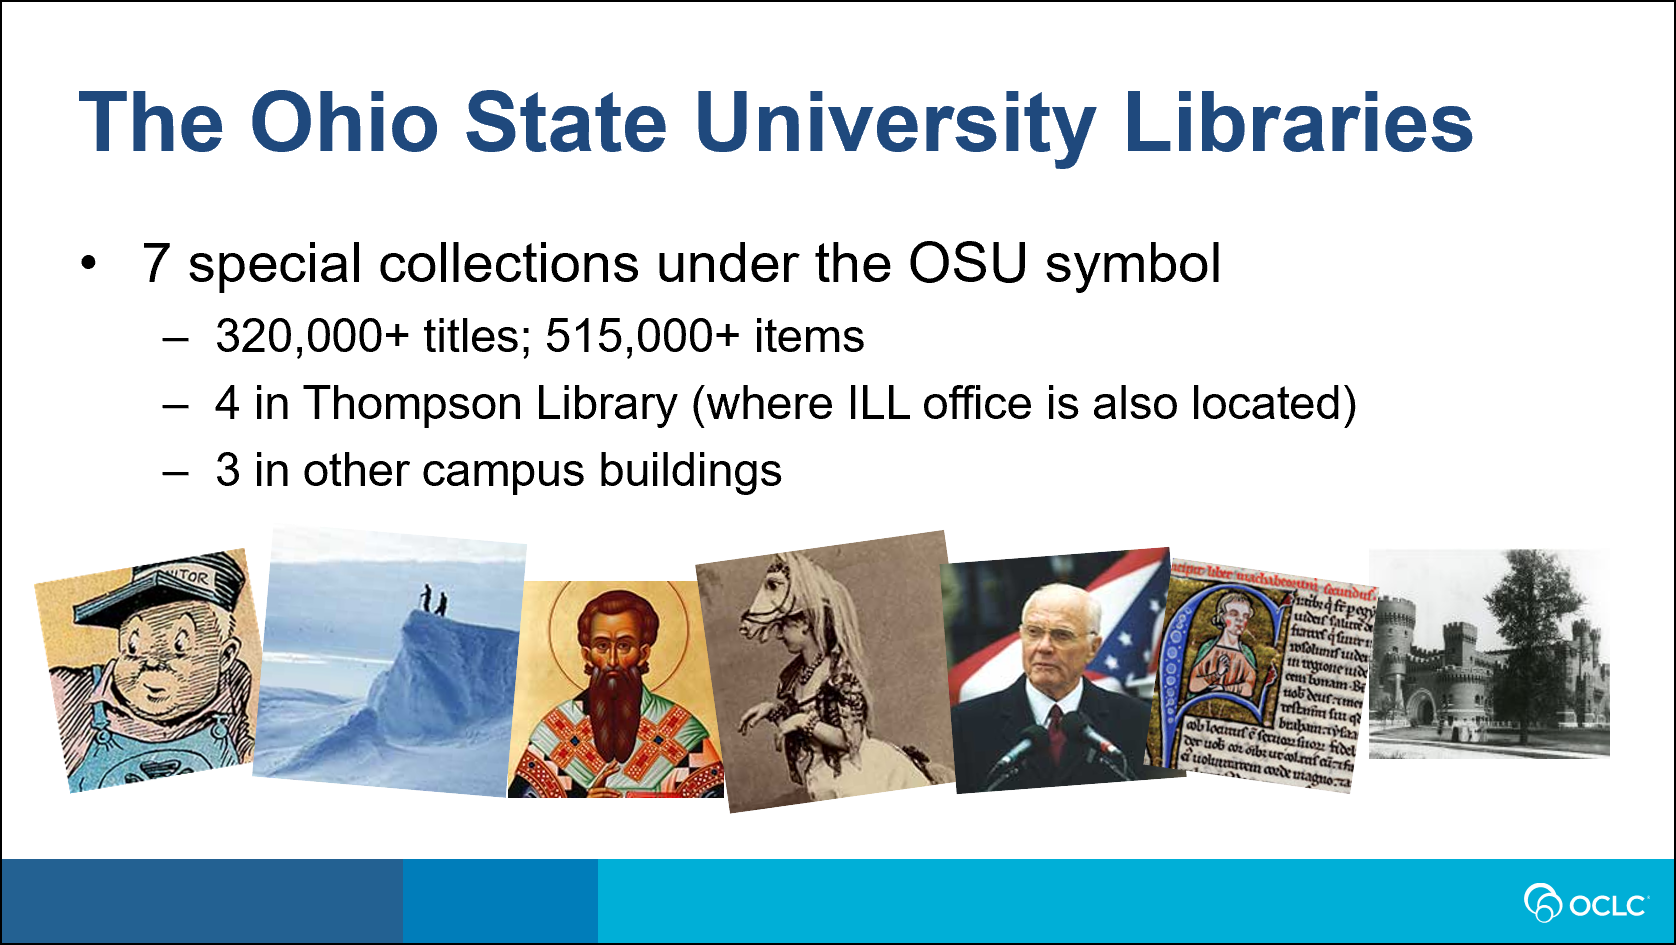 Special collections at The Ohio State University Libraries